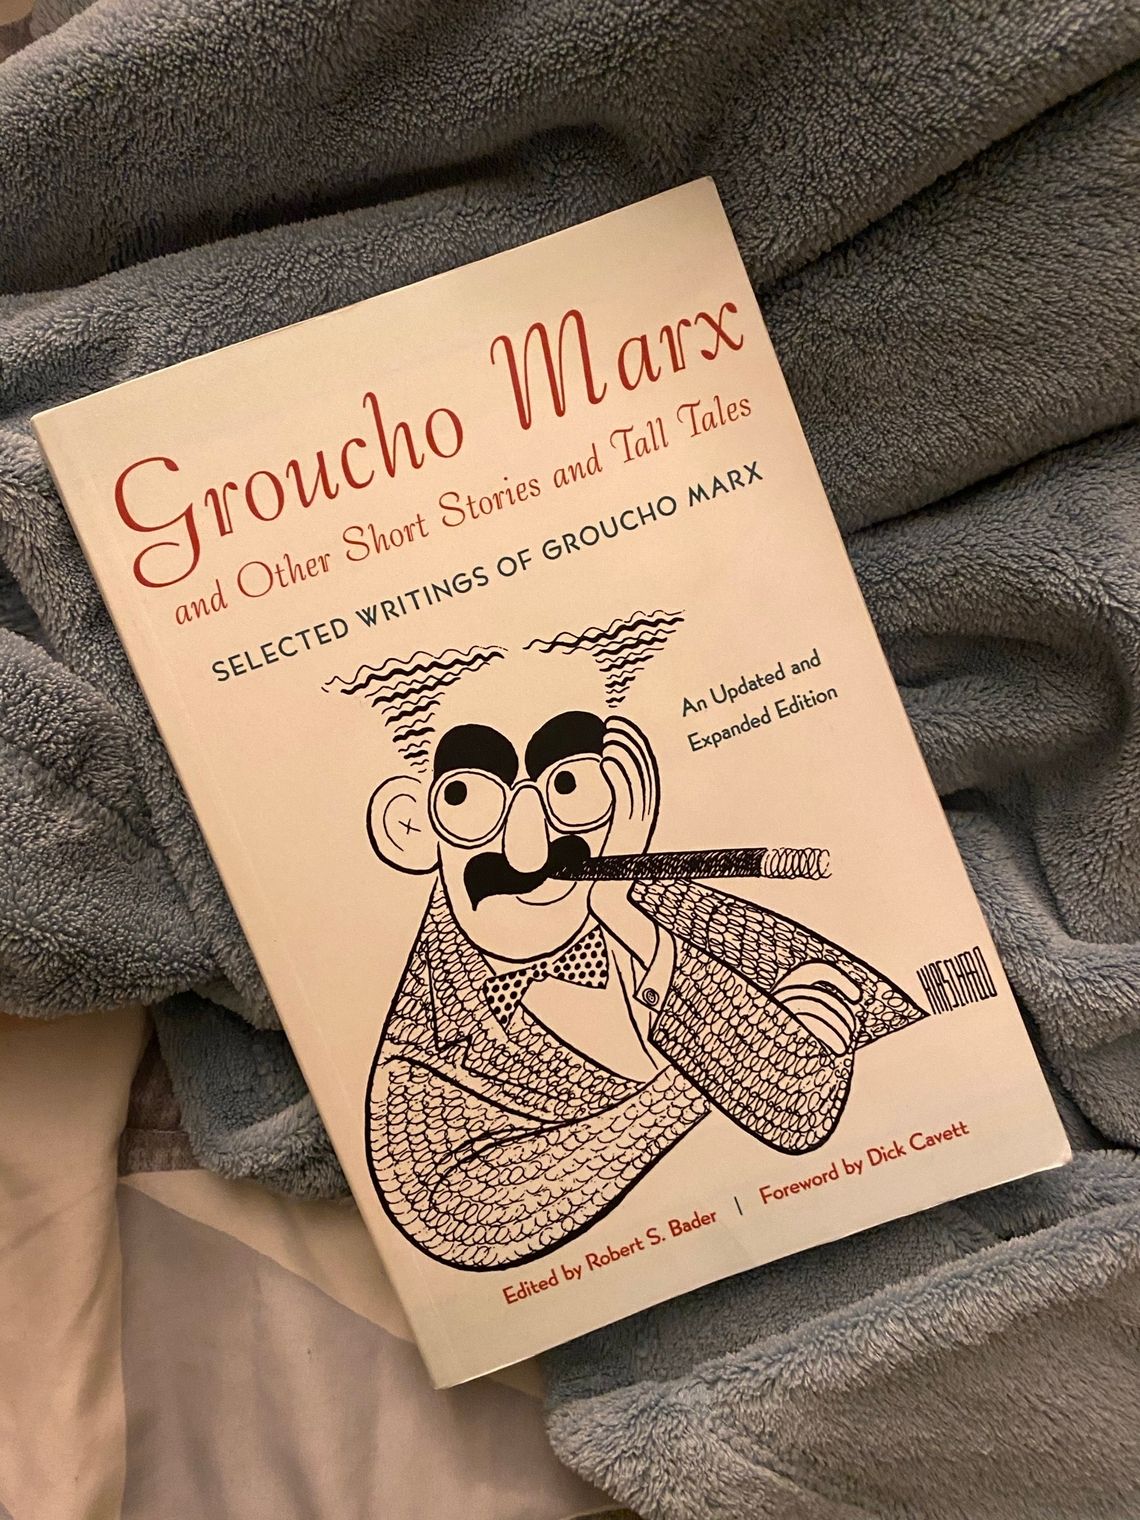 Book Review -- Groucho Marx and Other Short Stories